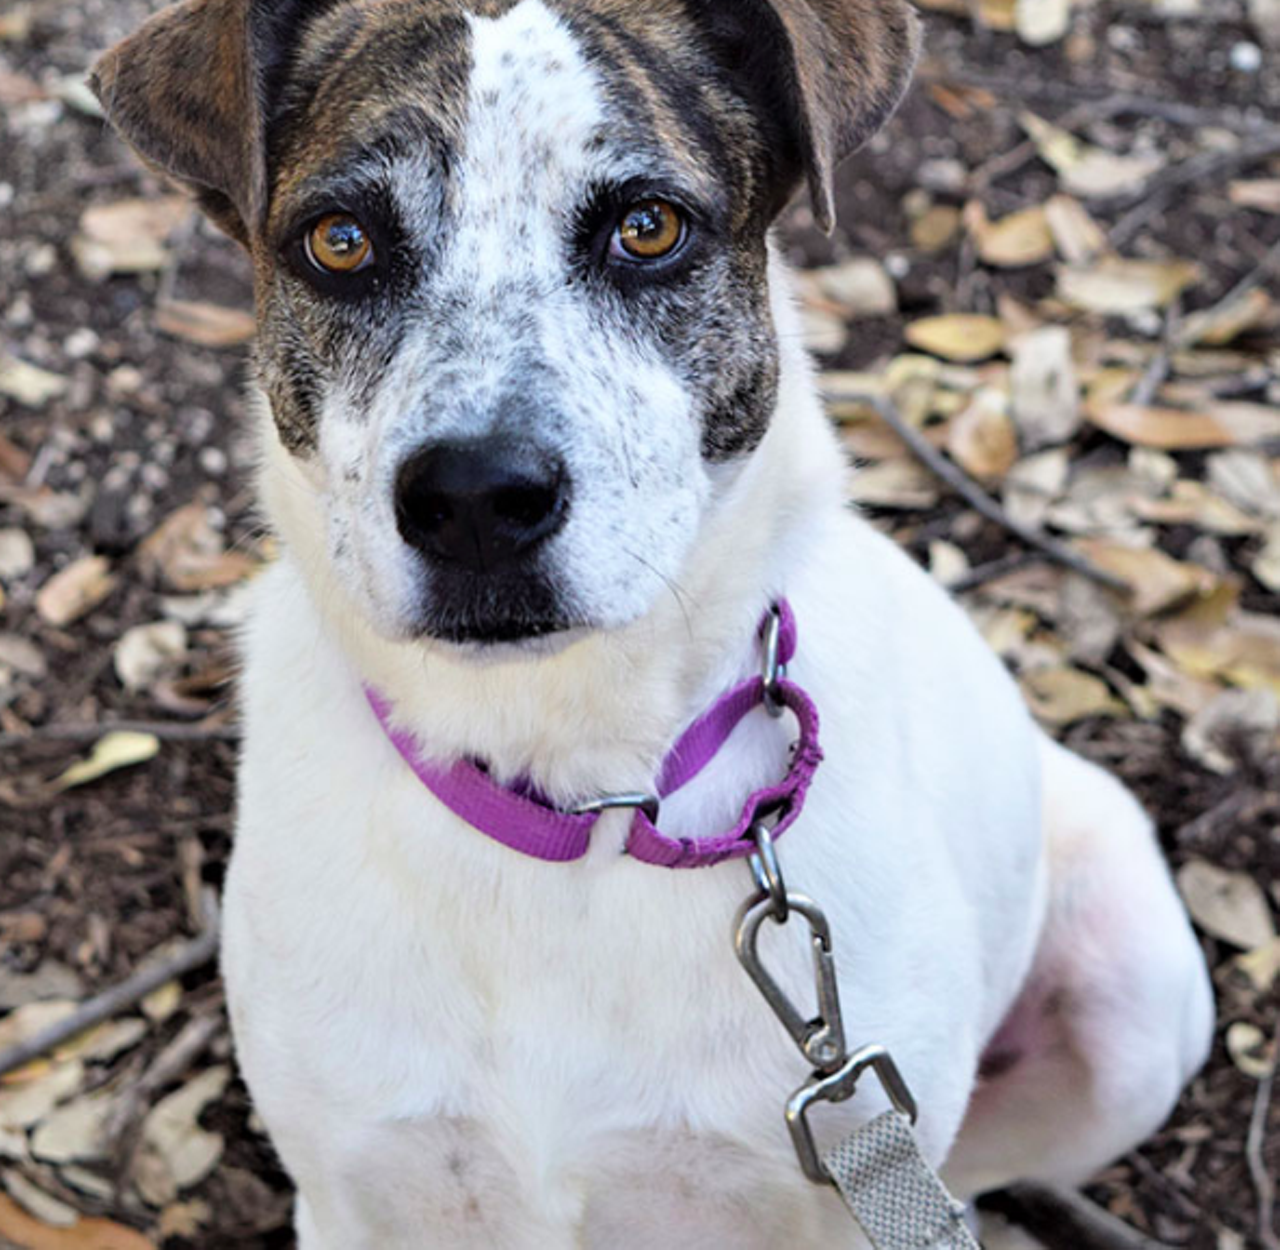 Peso
"Hola! My name is Peso! I LOVE to give kisses and I LOVE receiving lots of love! I  walk great on a leash and enjoy going out on my daily walks. All I want is to find my furever family. Could your family possibly be the one I’ve been looking for?"